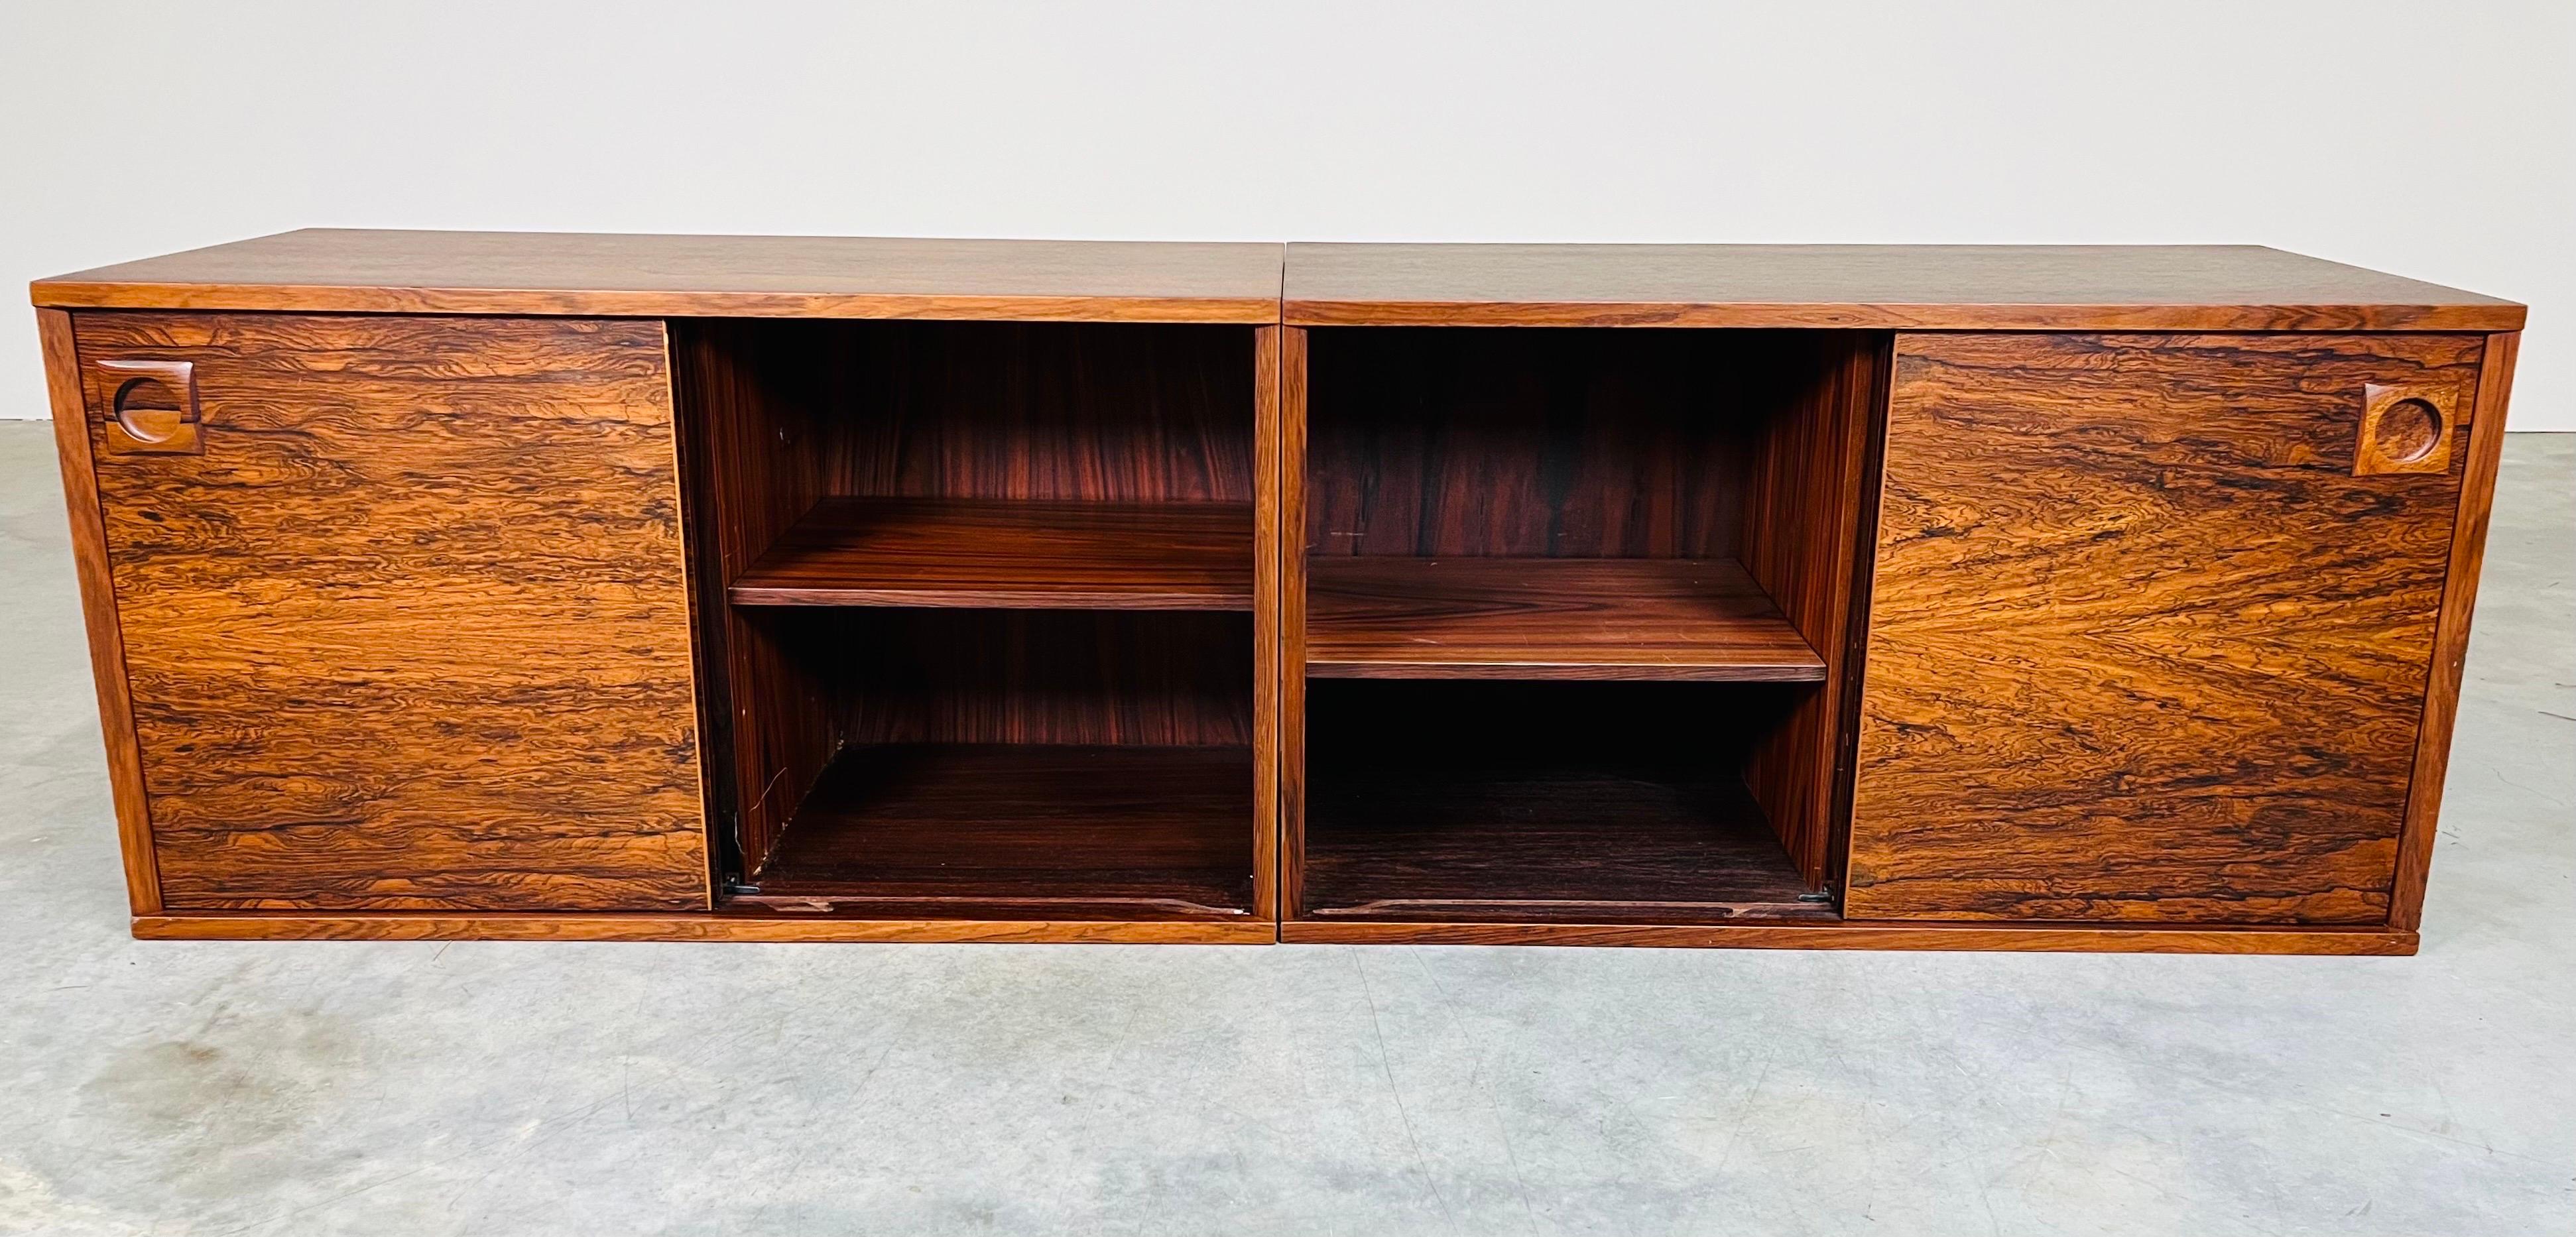 20th Century Danish Modern Rosewood Kai Kristiansen Style Wall Hanging Desk & Cabinets For Sale